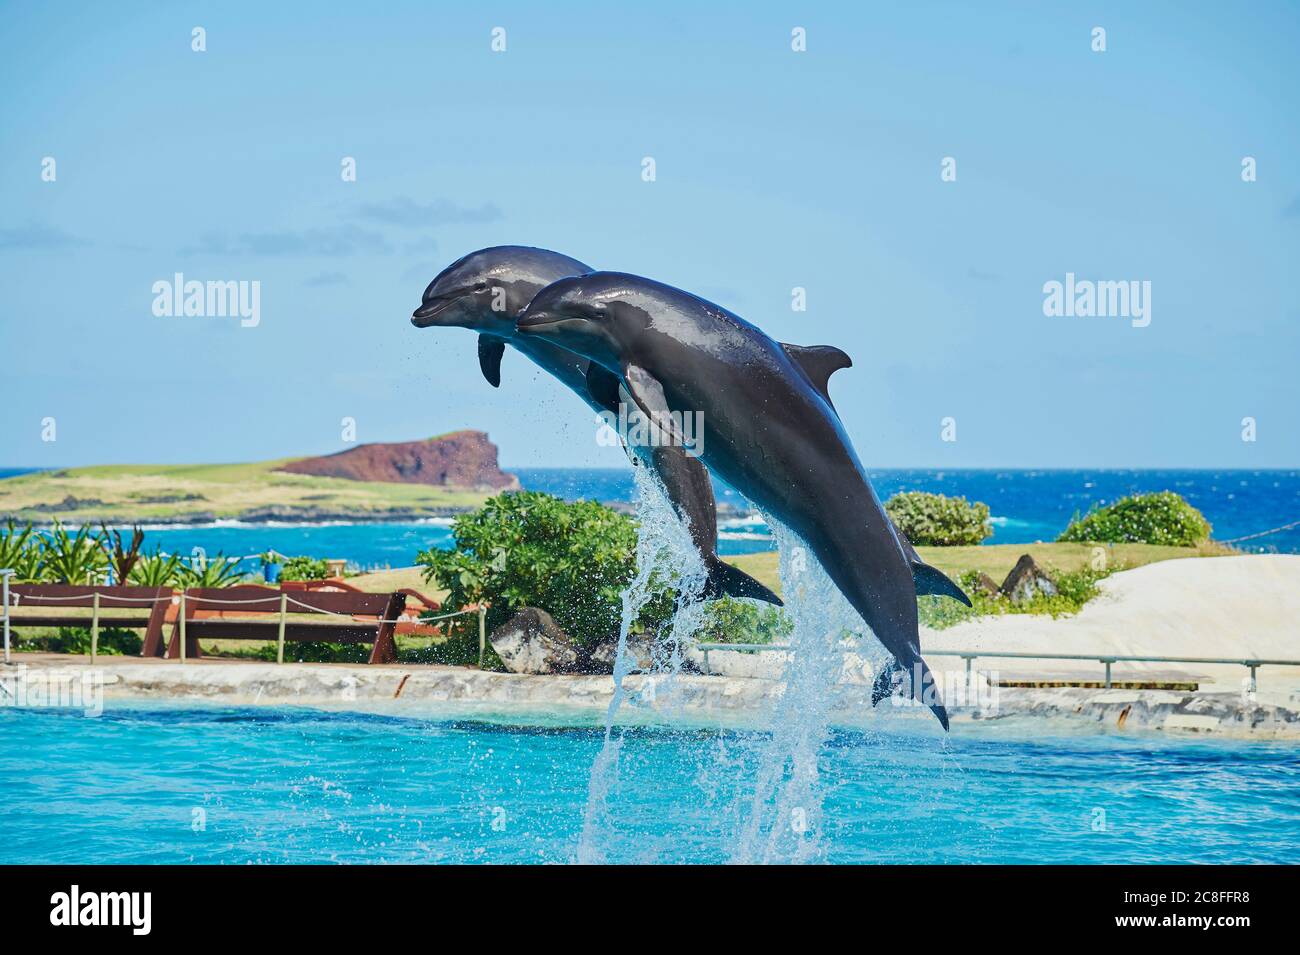 Bottlenosed dolphin, Common bottle-nosed dolphin (Tursiops truncatus), two dolphins jumping out of the water in a dolphinarium, side view Stock Photo